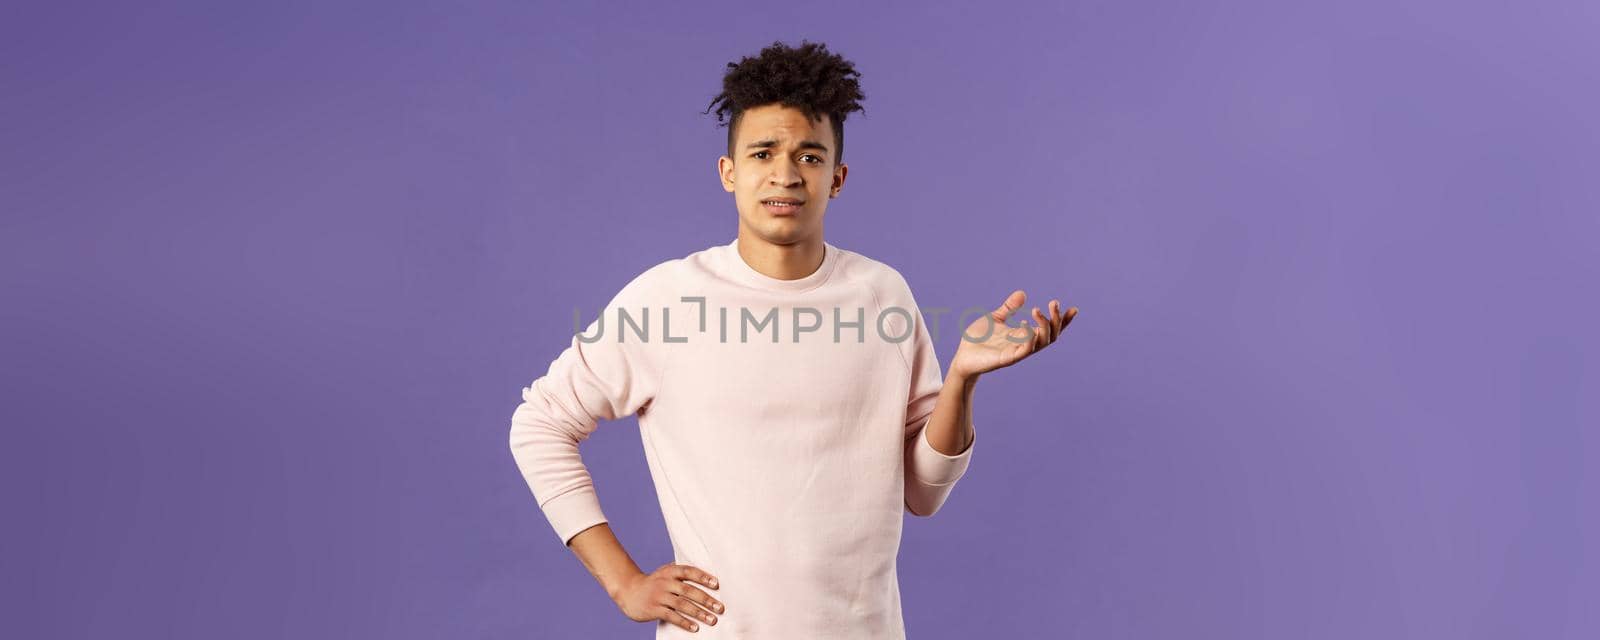 So what, why asking. Portrait of unbothered and careless, ignorant young man dont care on people rules, raising hand in dismay and confusion, being puzzled, look uninterested, purple background.